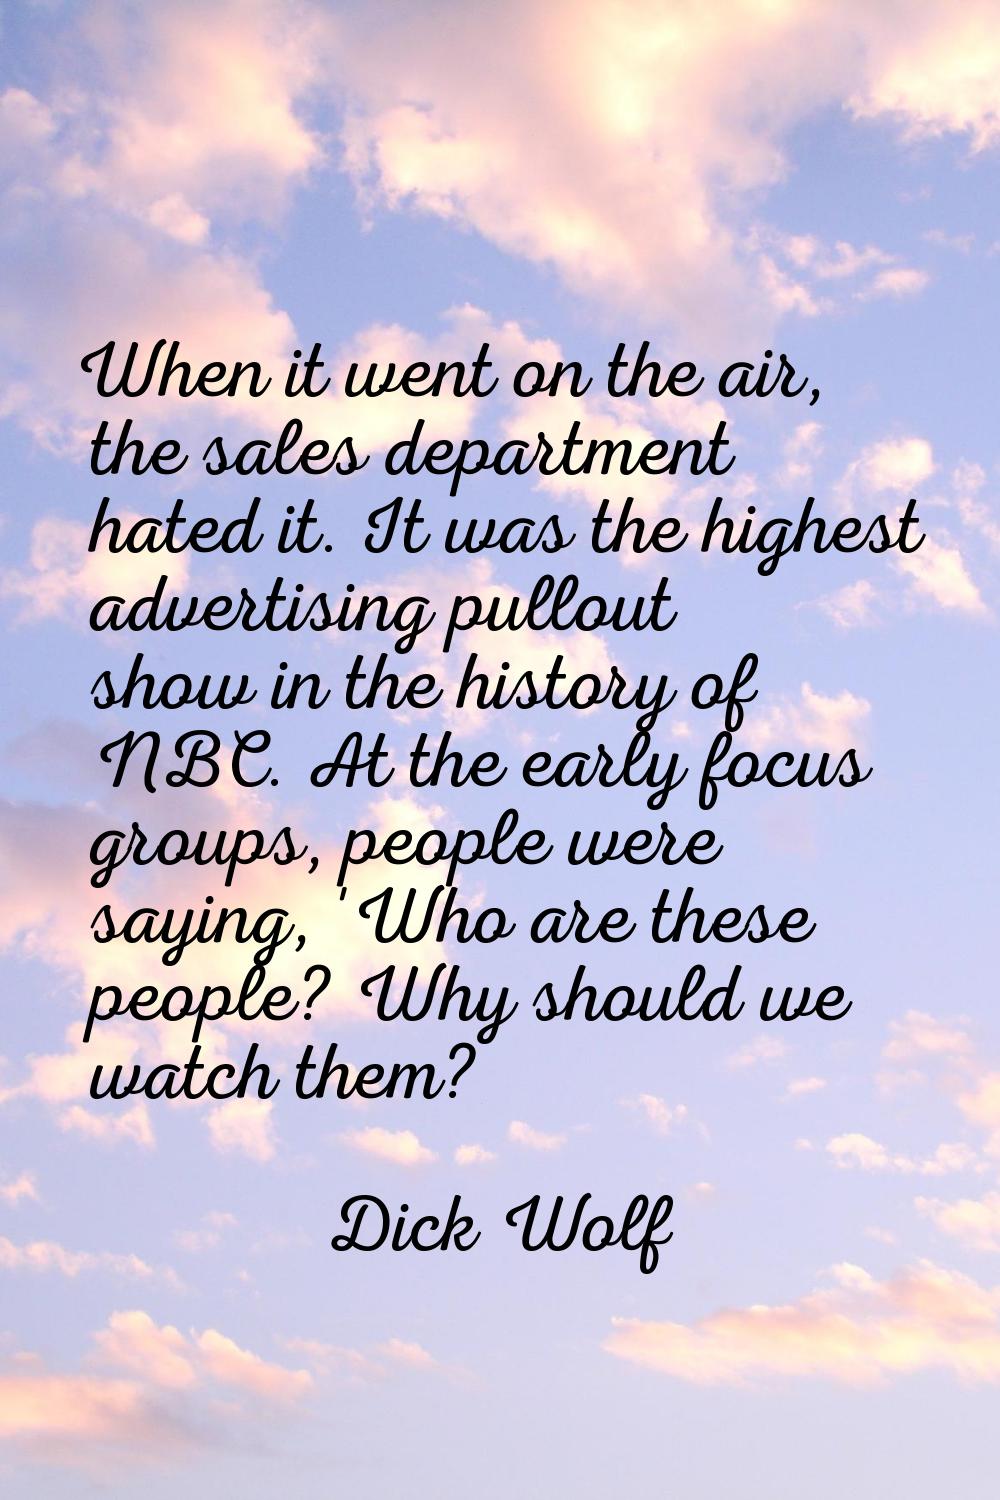 When it went on the air, the sales department hated it. It was the highest advertising pullout show